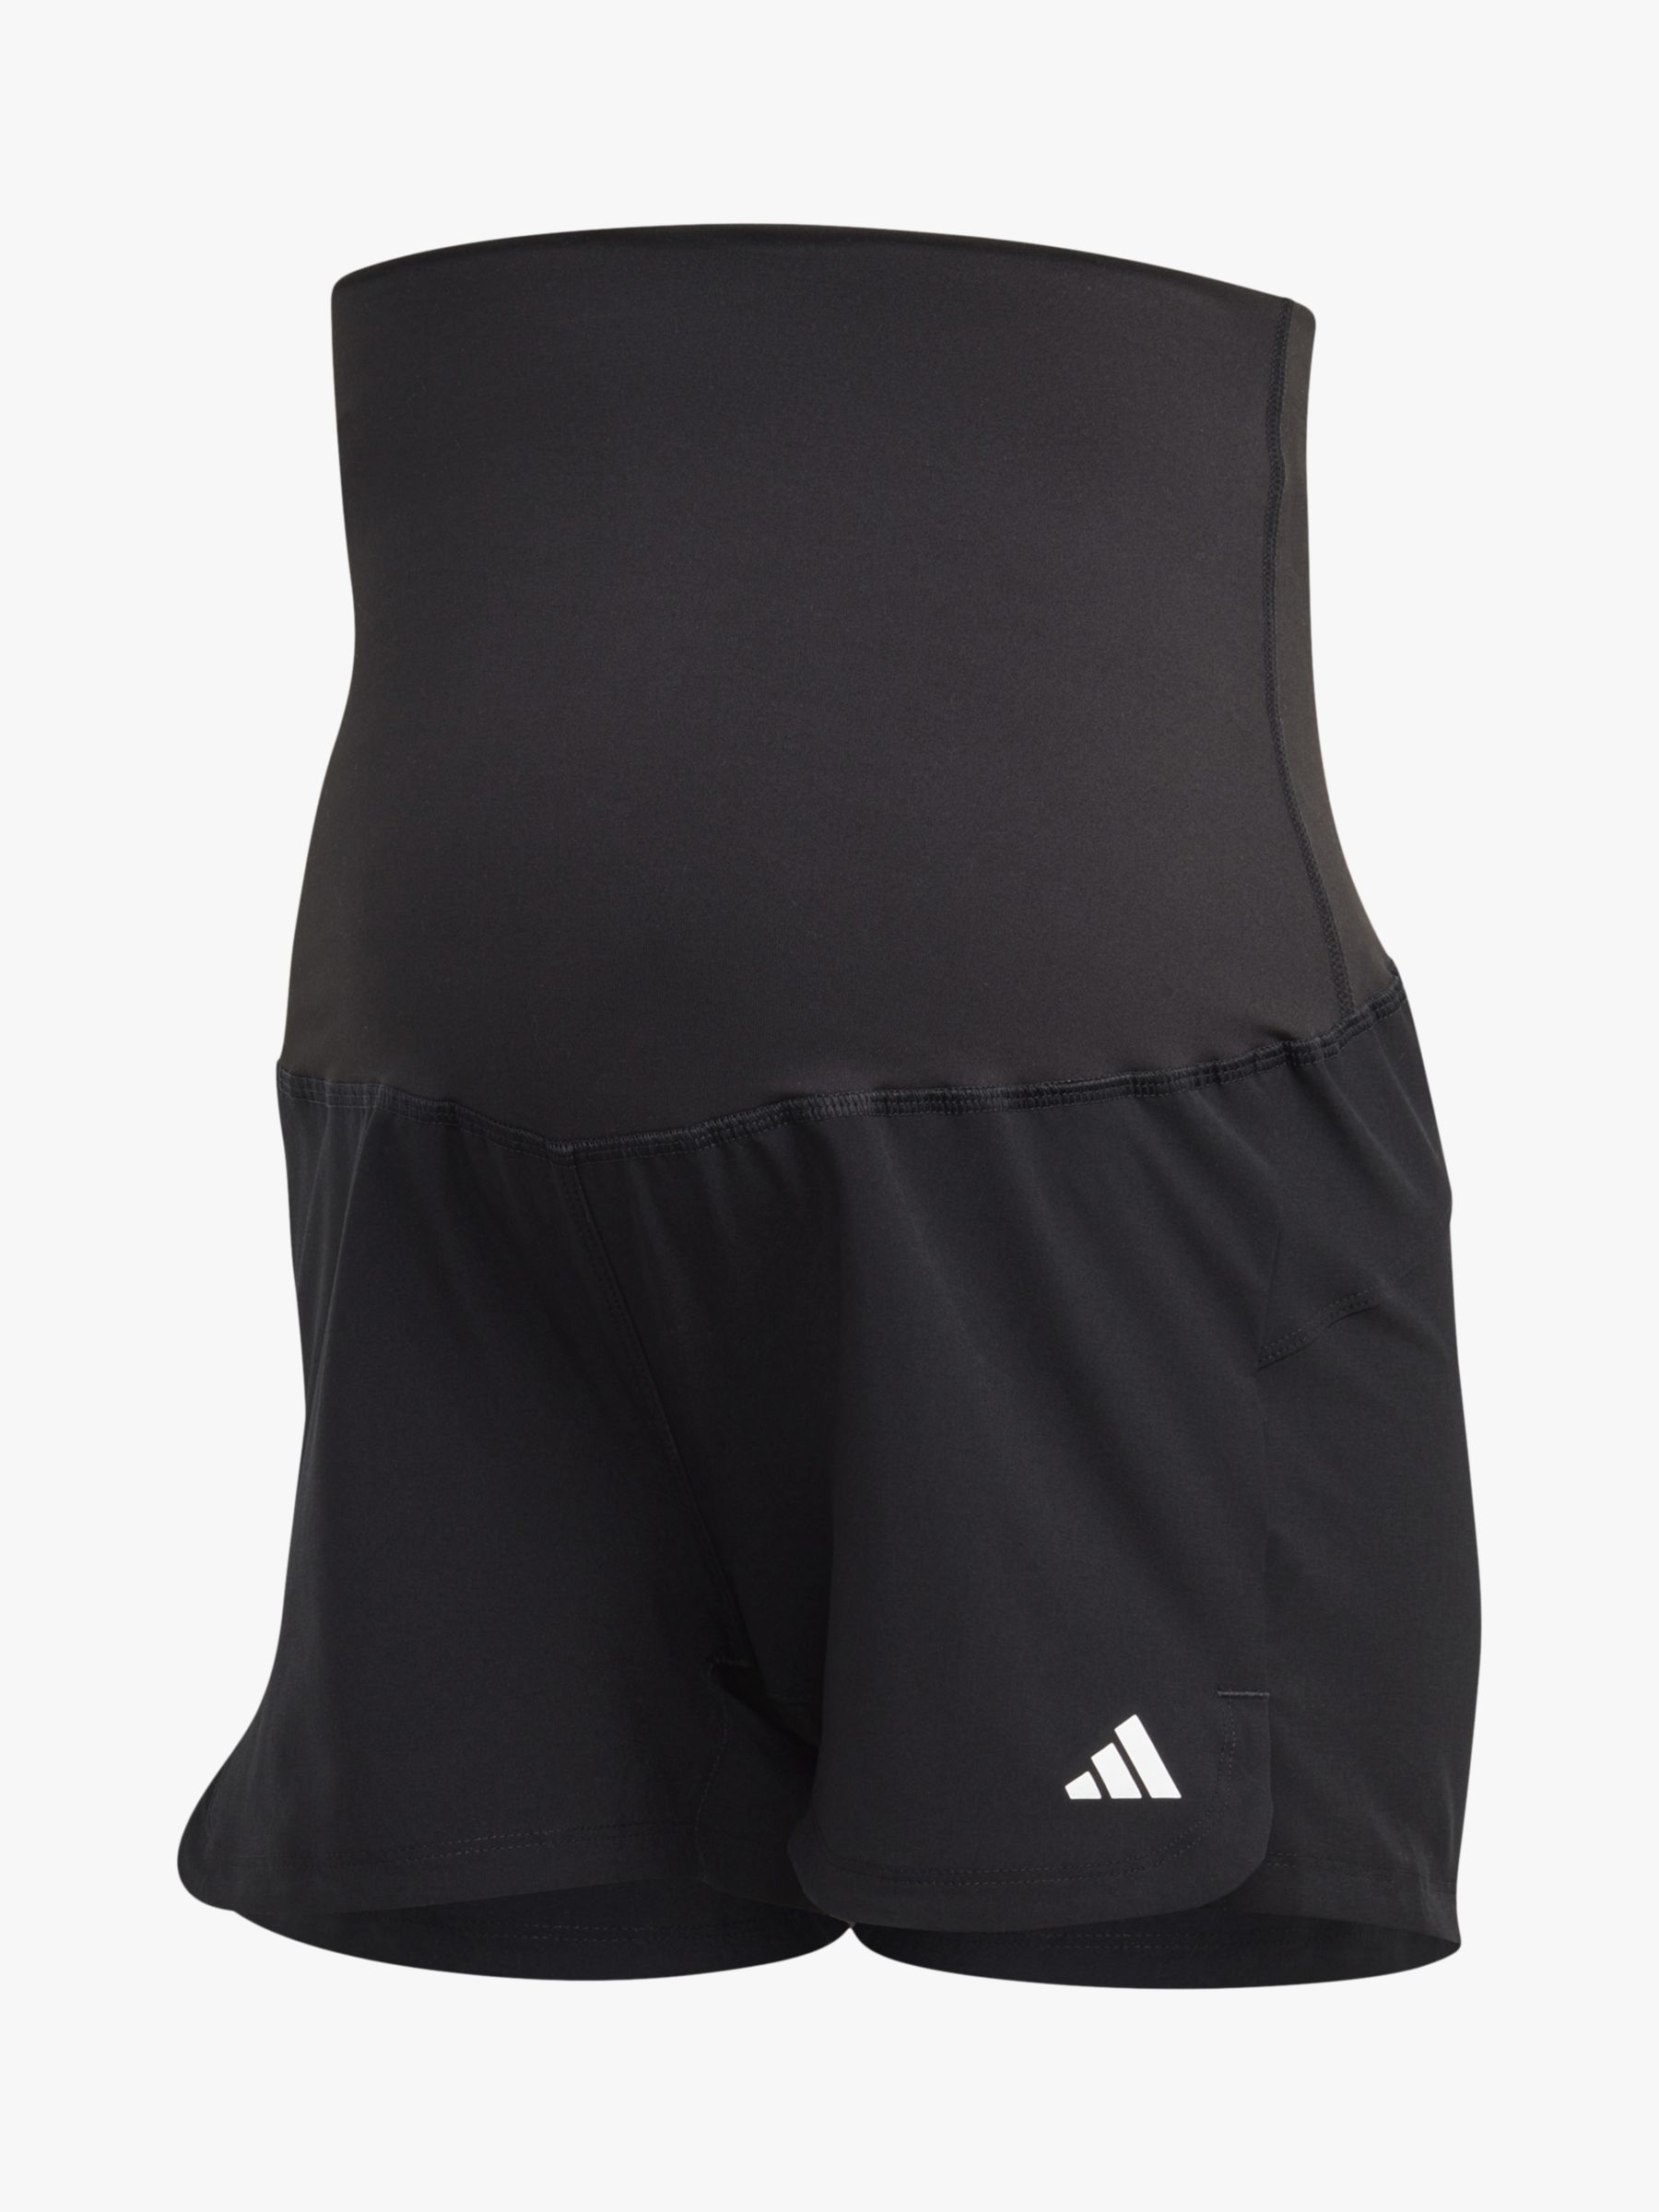 adidas Maternity Pacer AEROREADY Train Essentials Woven Gym Shorts Black M female 87% recycled polyester, 13% elastane